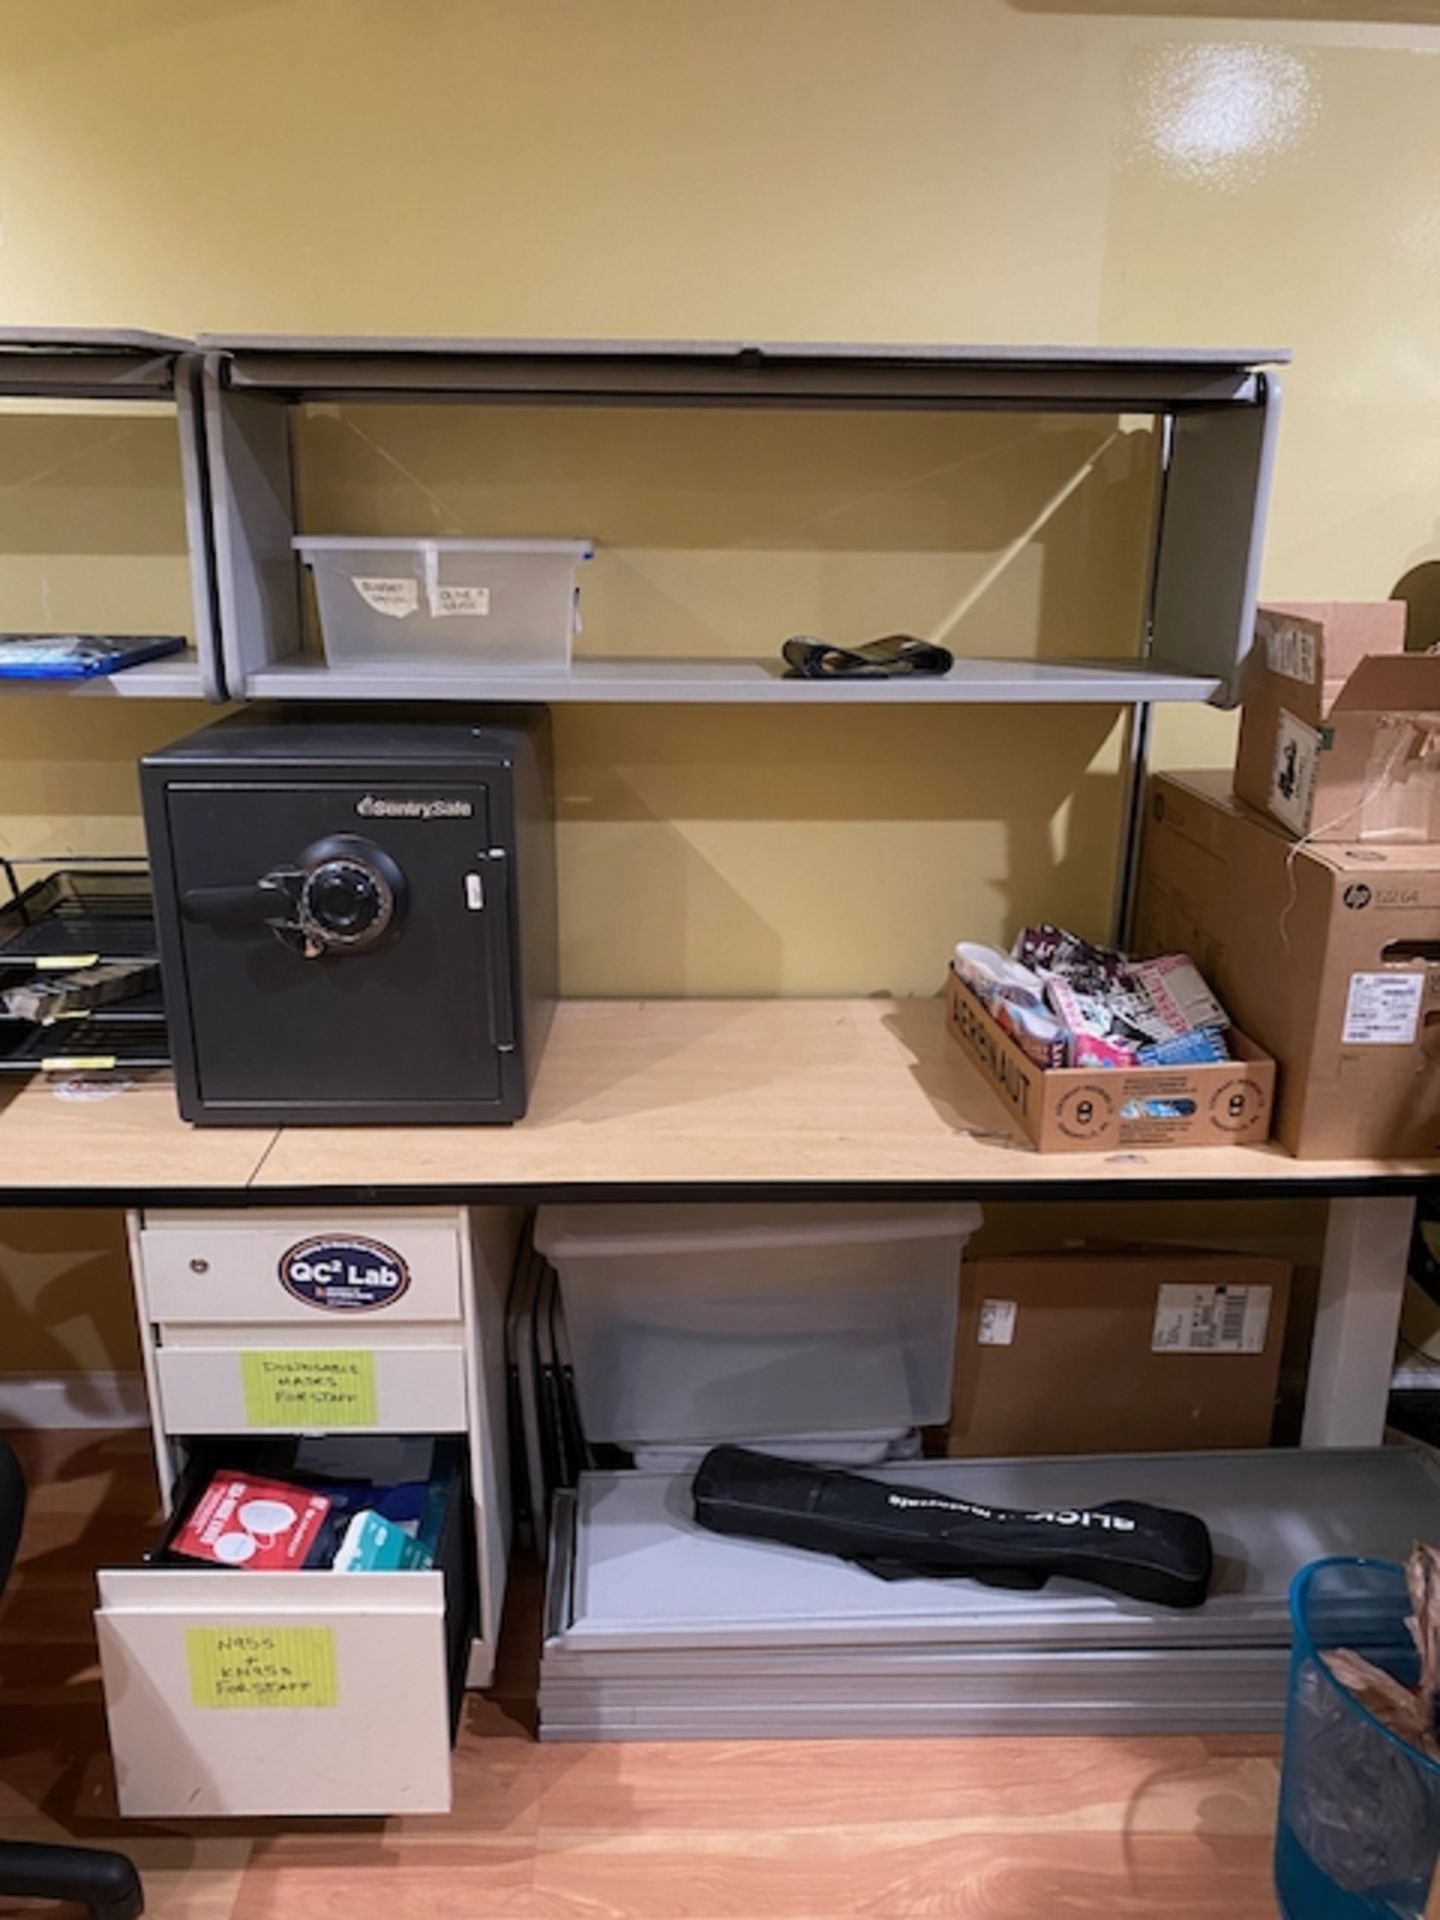 Workstations With Desks And Wall-Mounted Shelves | Rig Fee $250 - Image 2 of 3